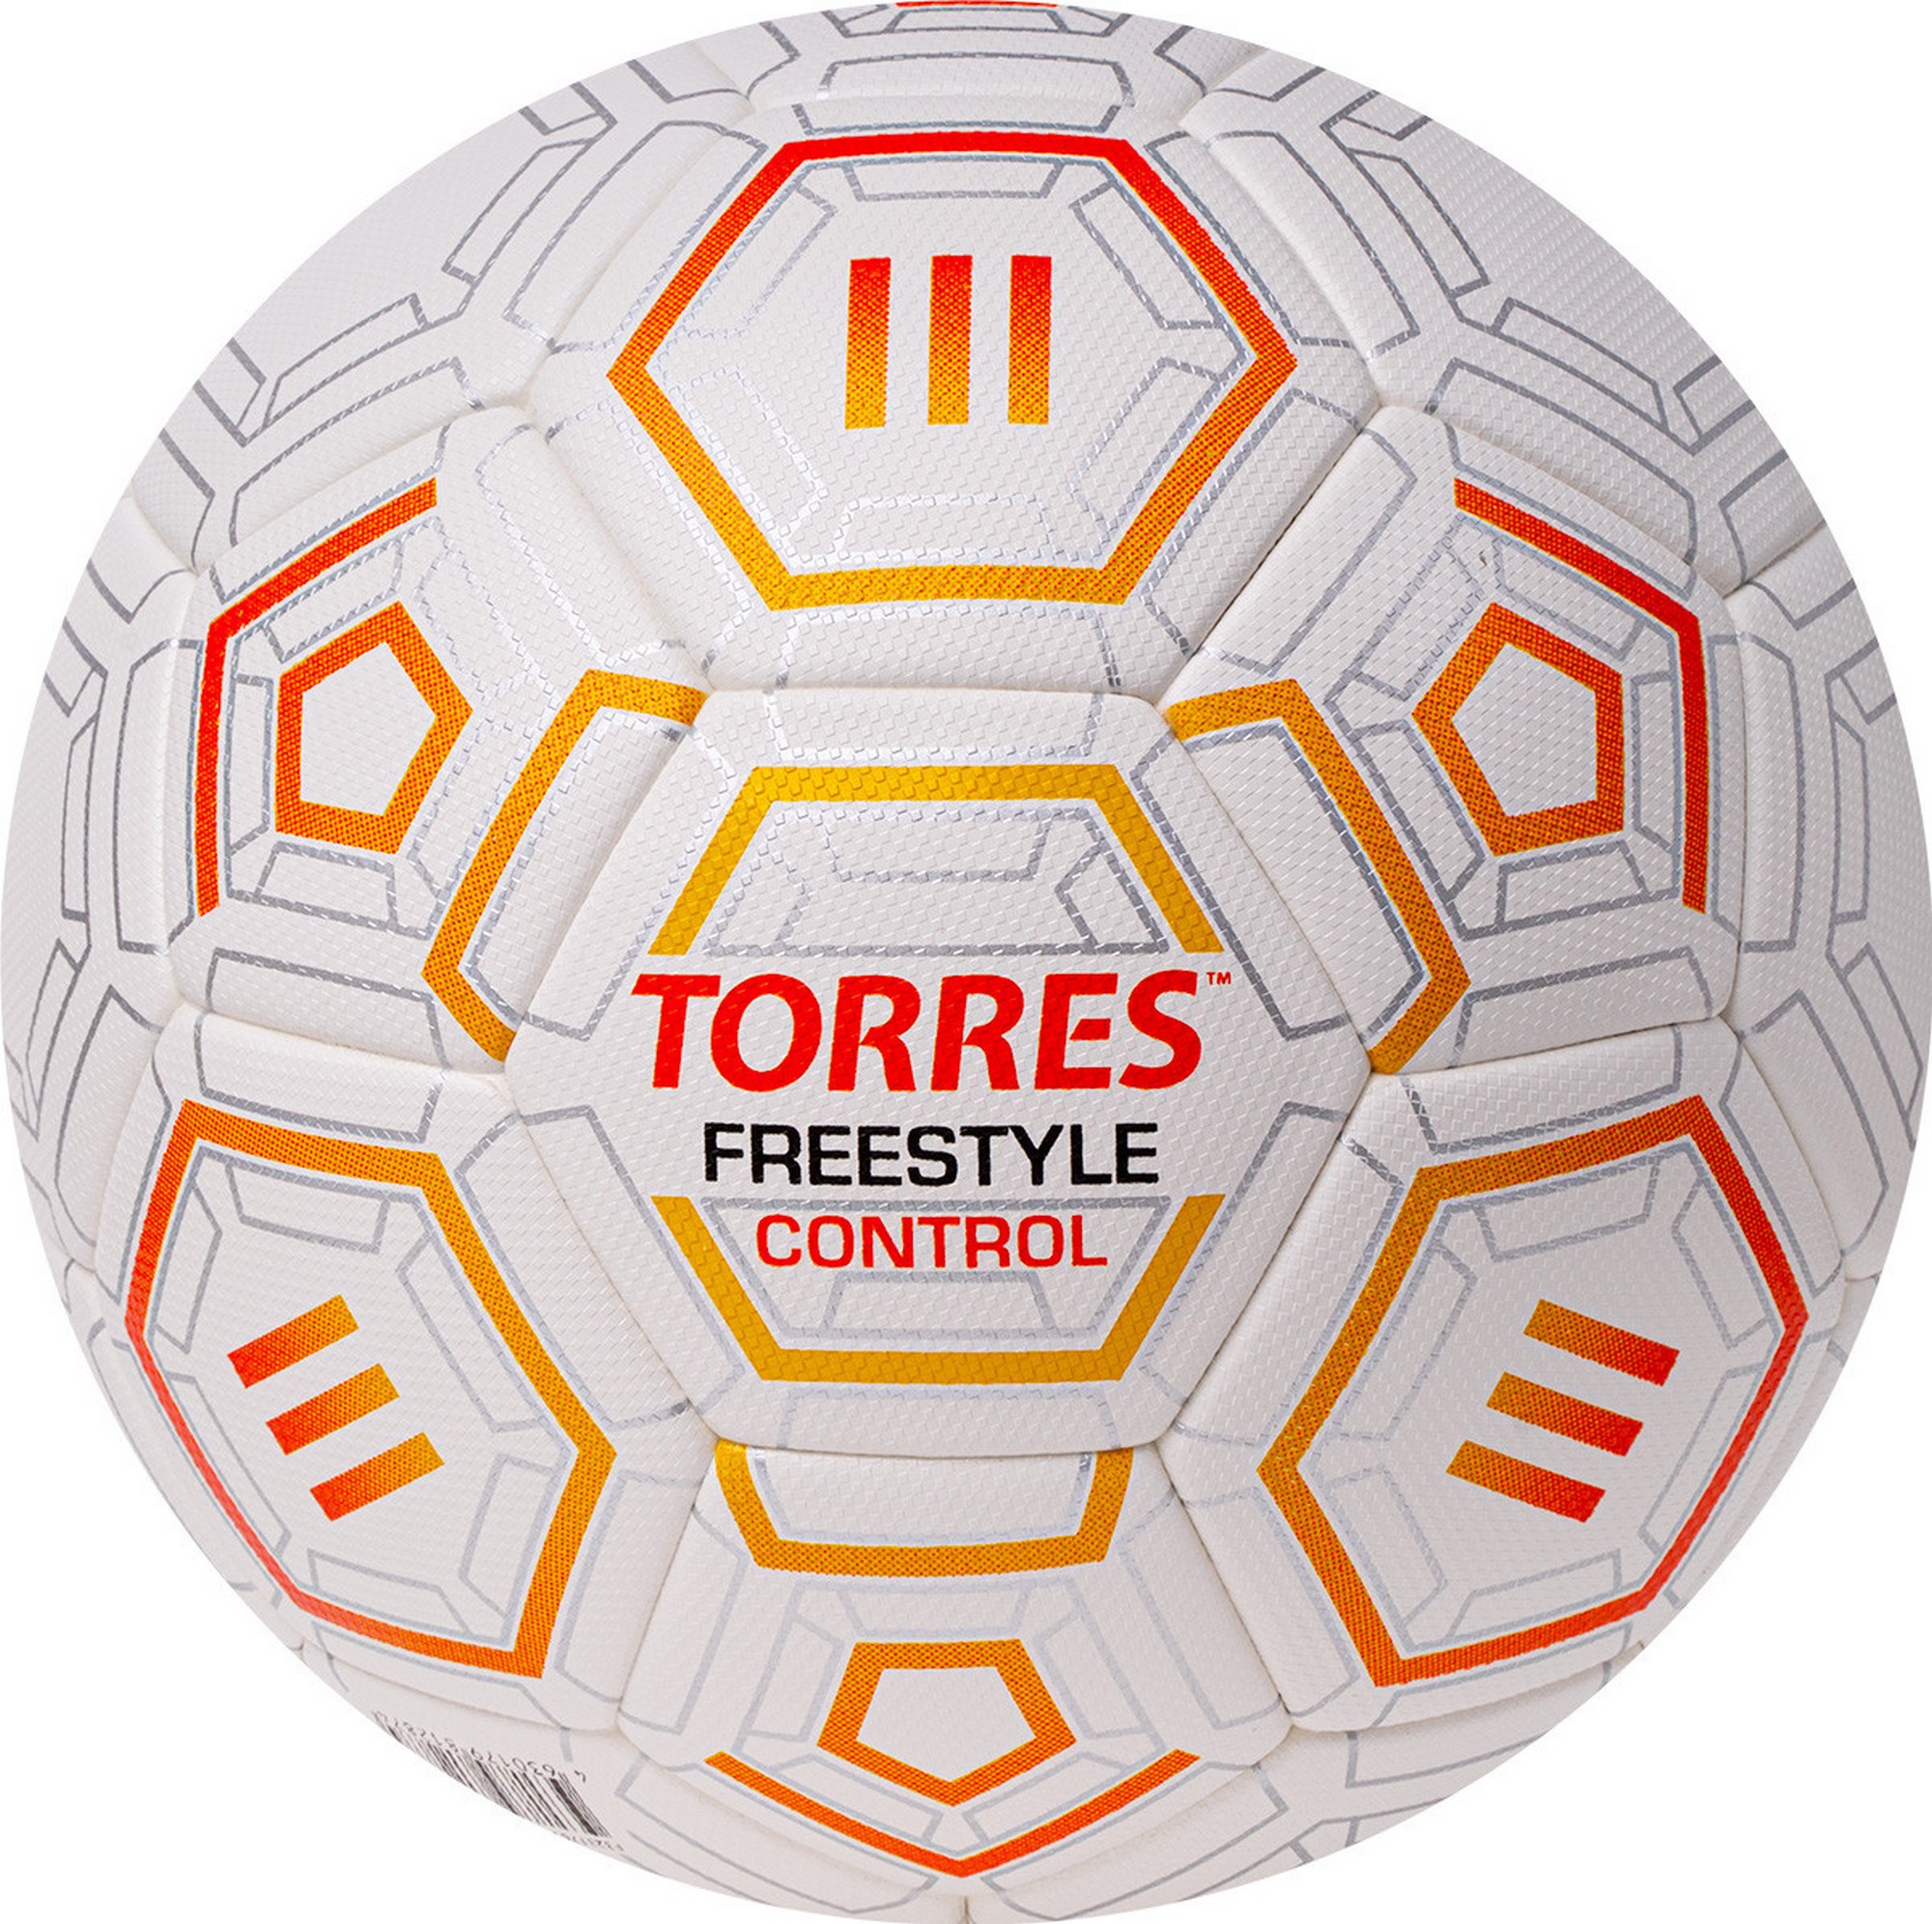   Torres Freestyle Control F3231765 .5